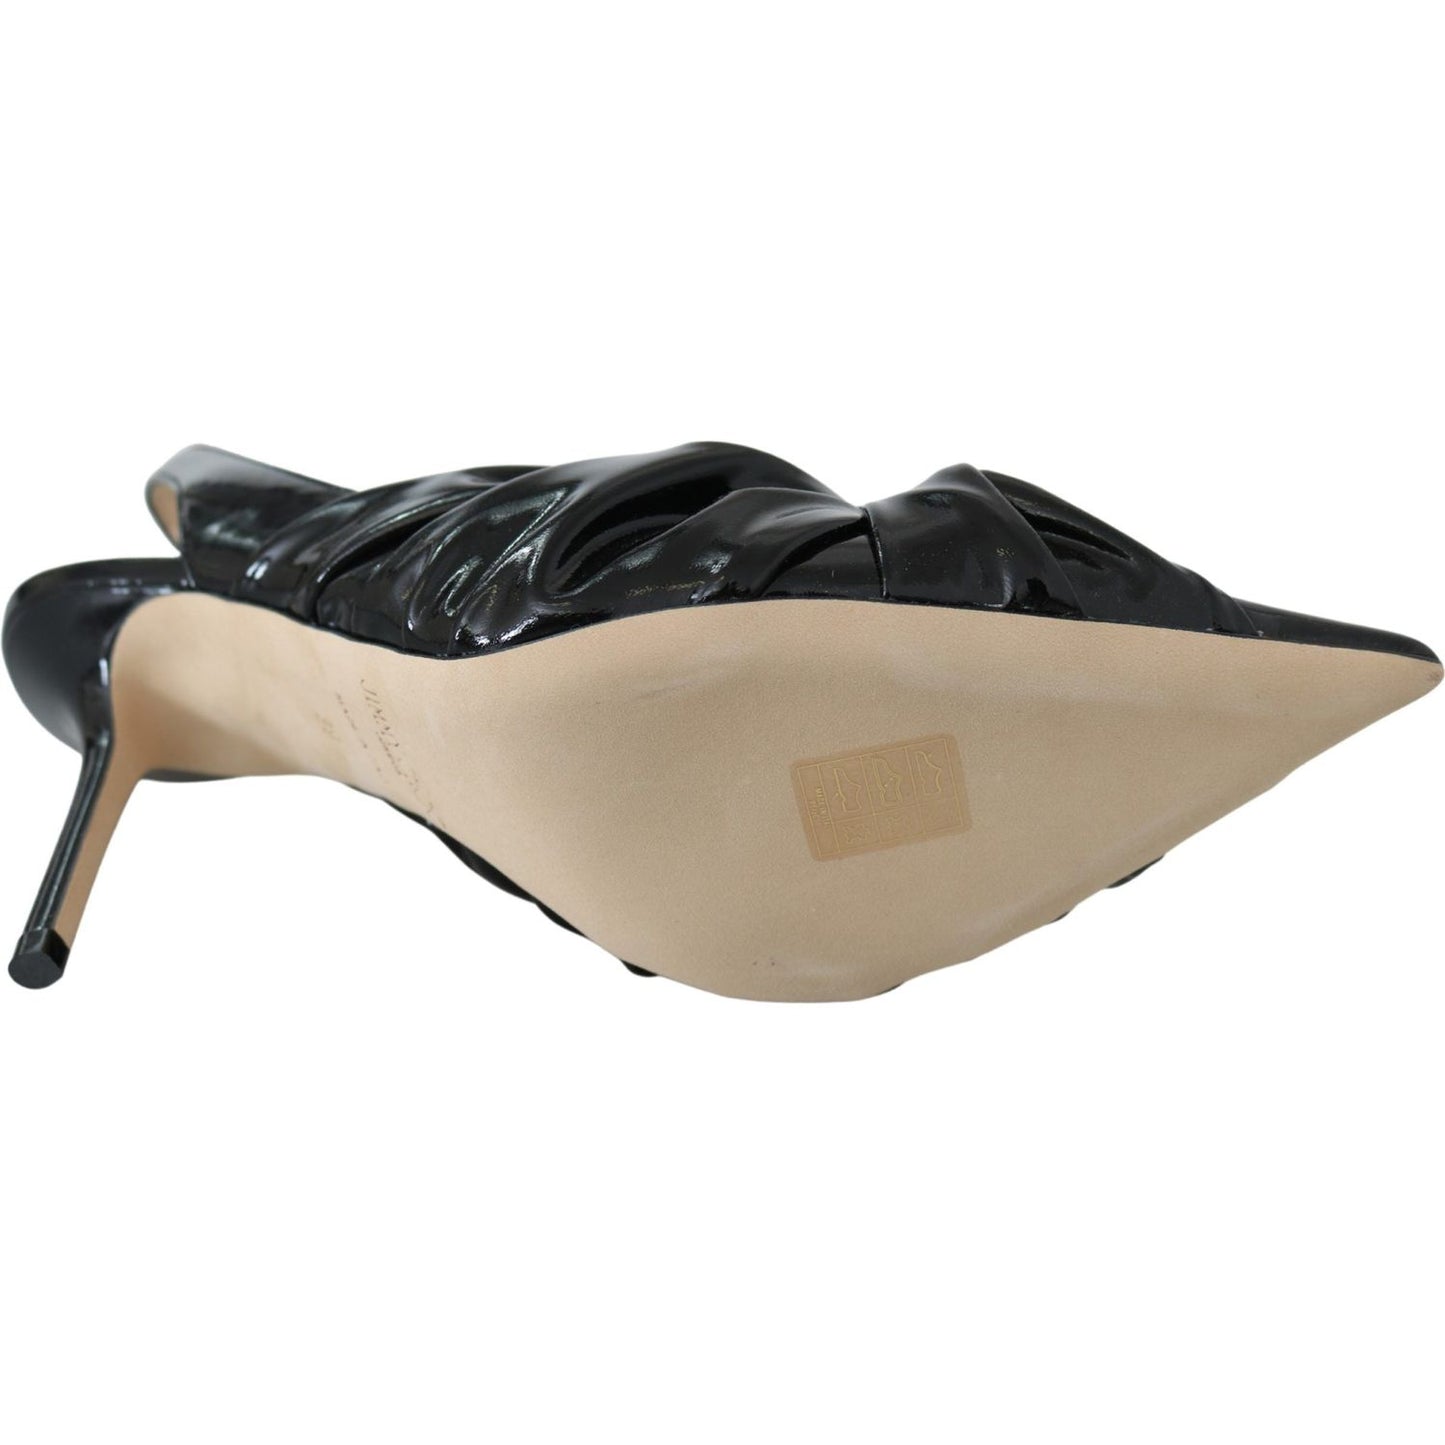 Jimmy Choo Elegant Black Leather Pointed Toe Pumps Shoes annabell-85-black-patent-leather-pumps